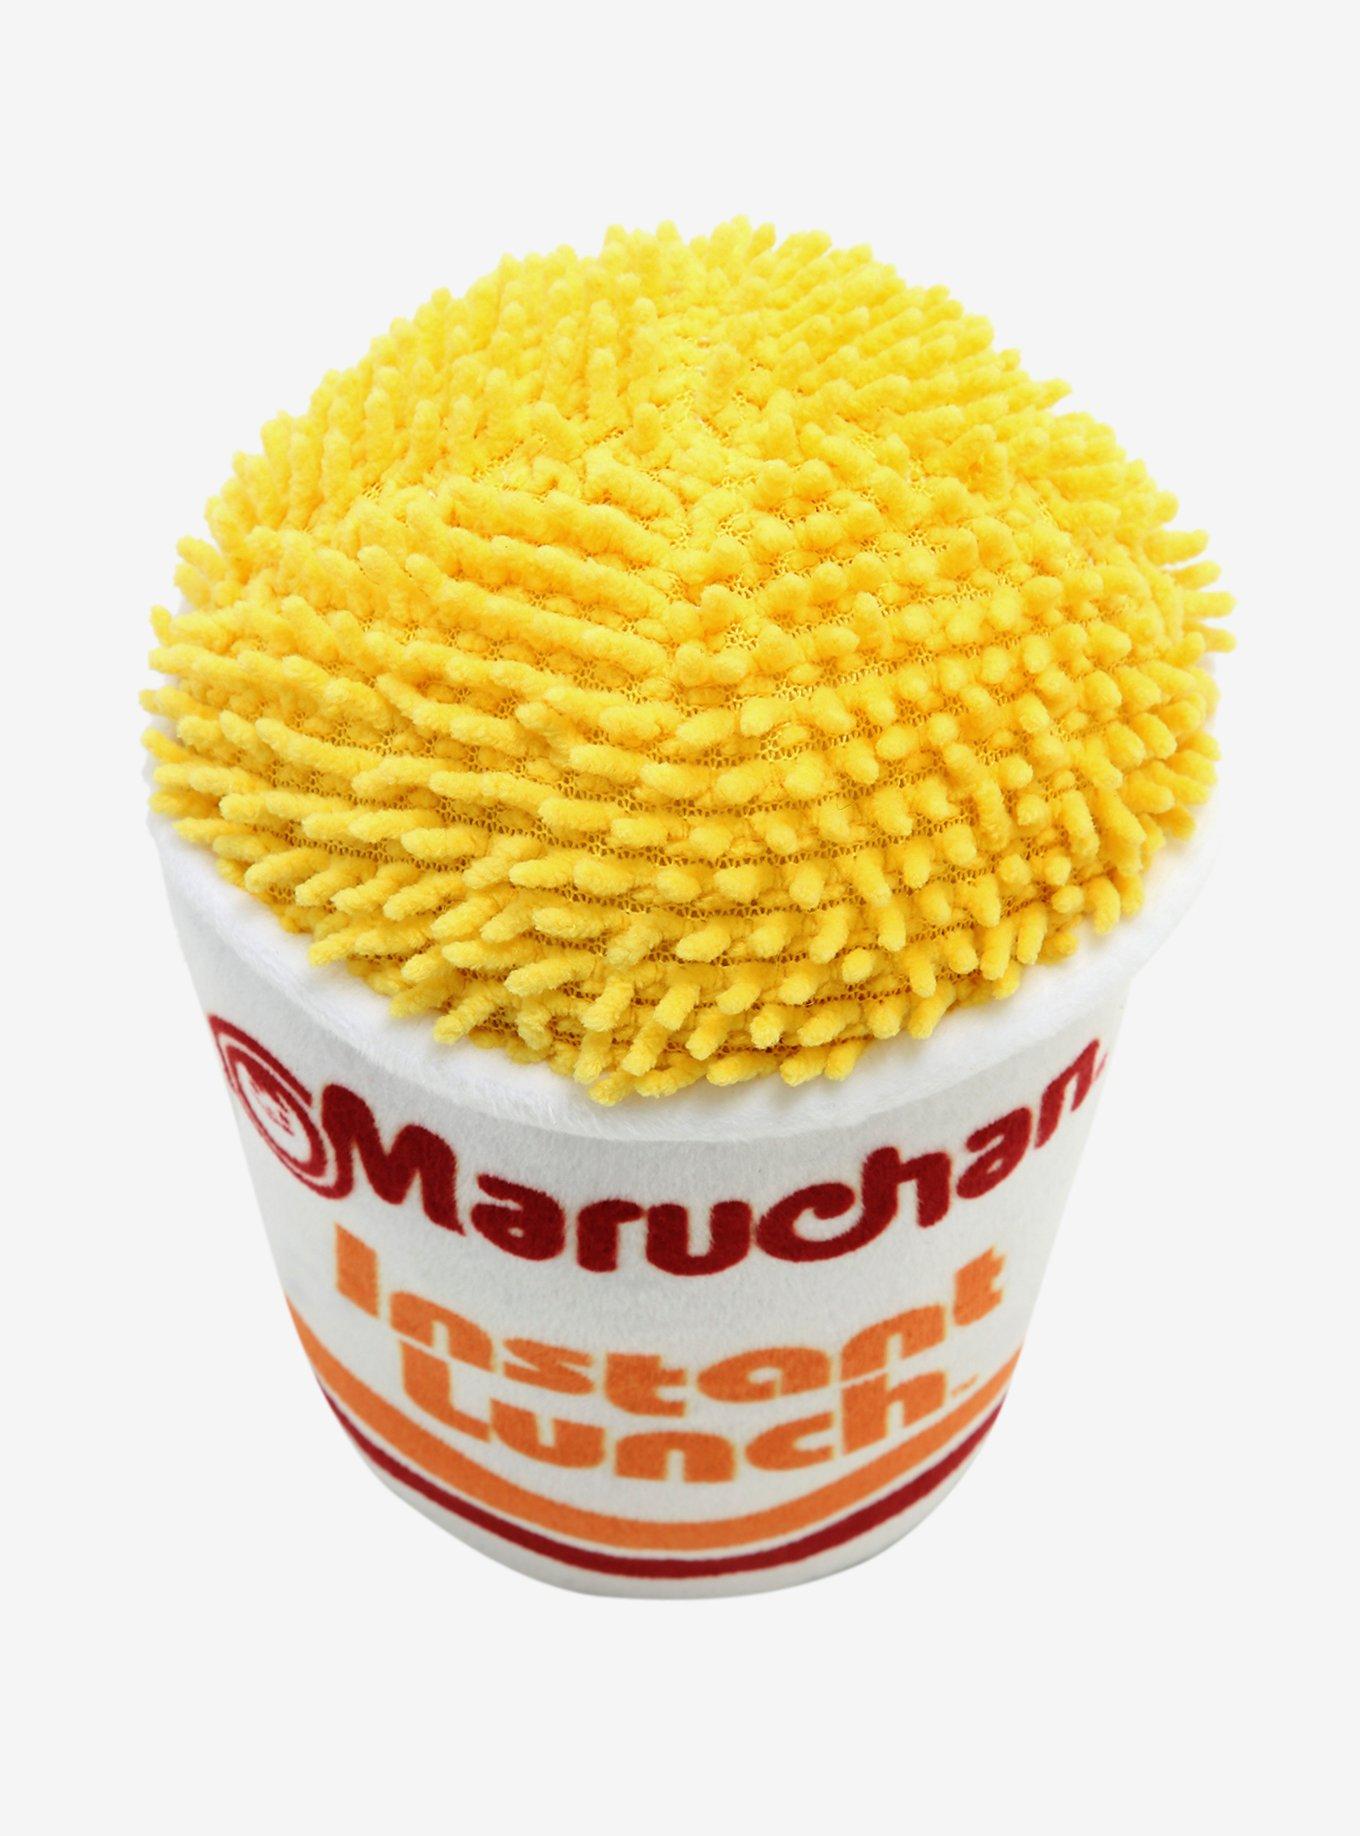 Maruchan Noodle Pack Squeaky Plush Dog Toy - BoxLunch Exclusive